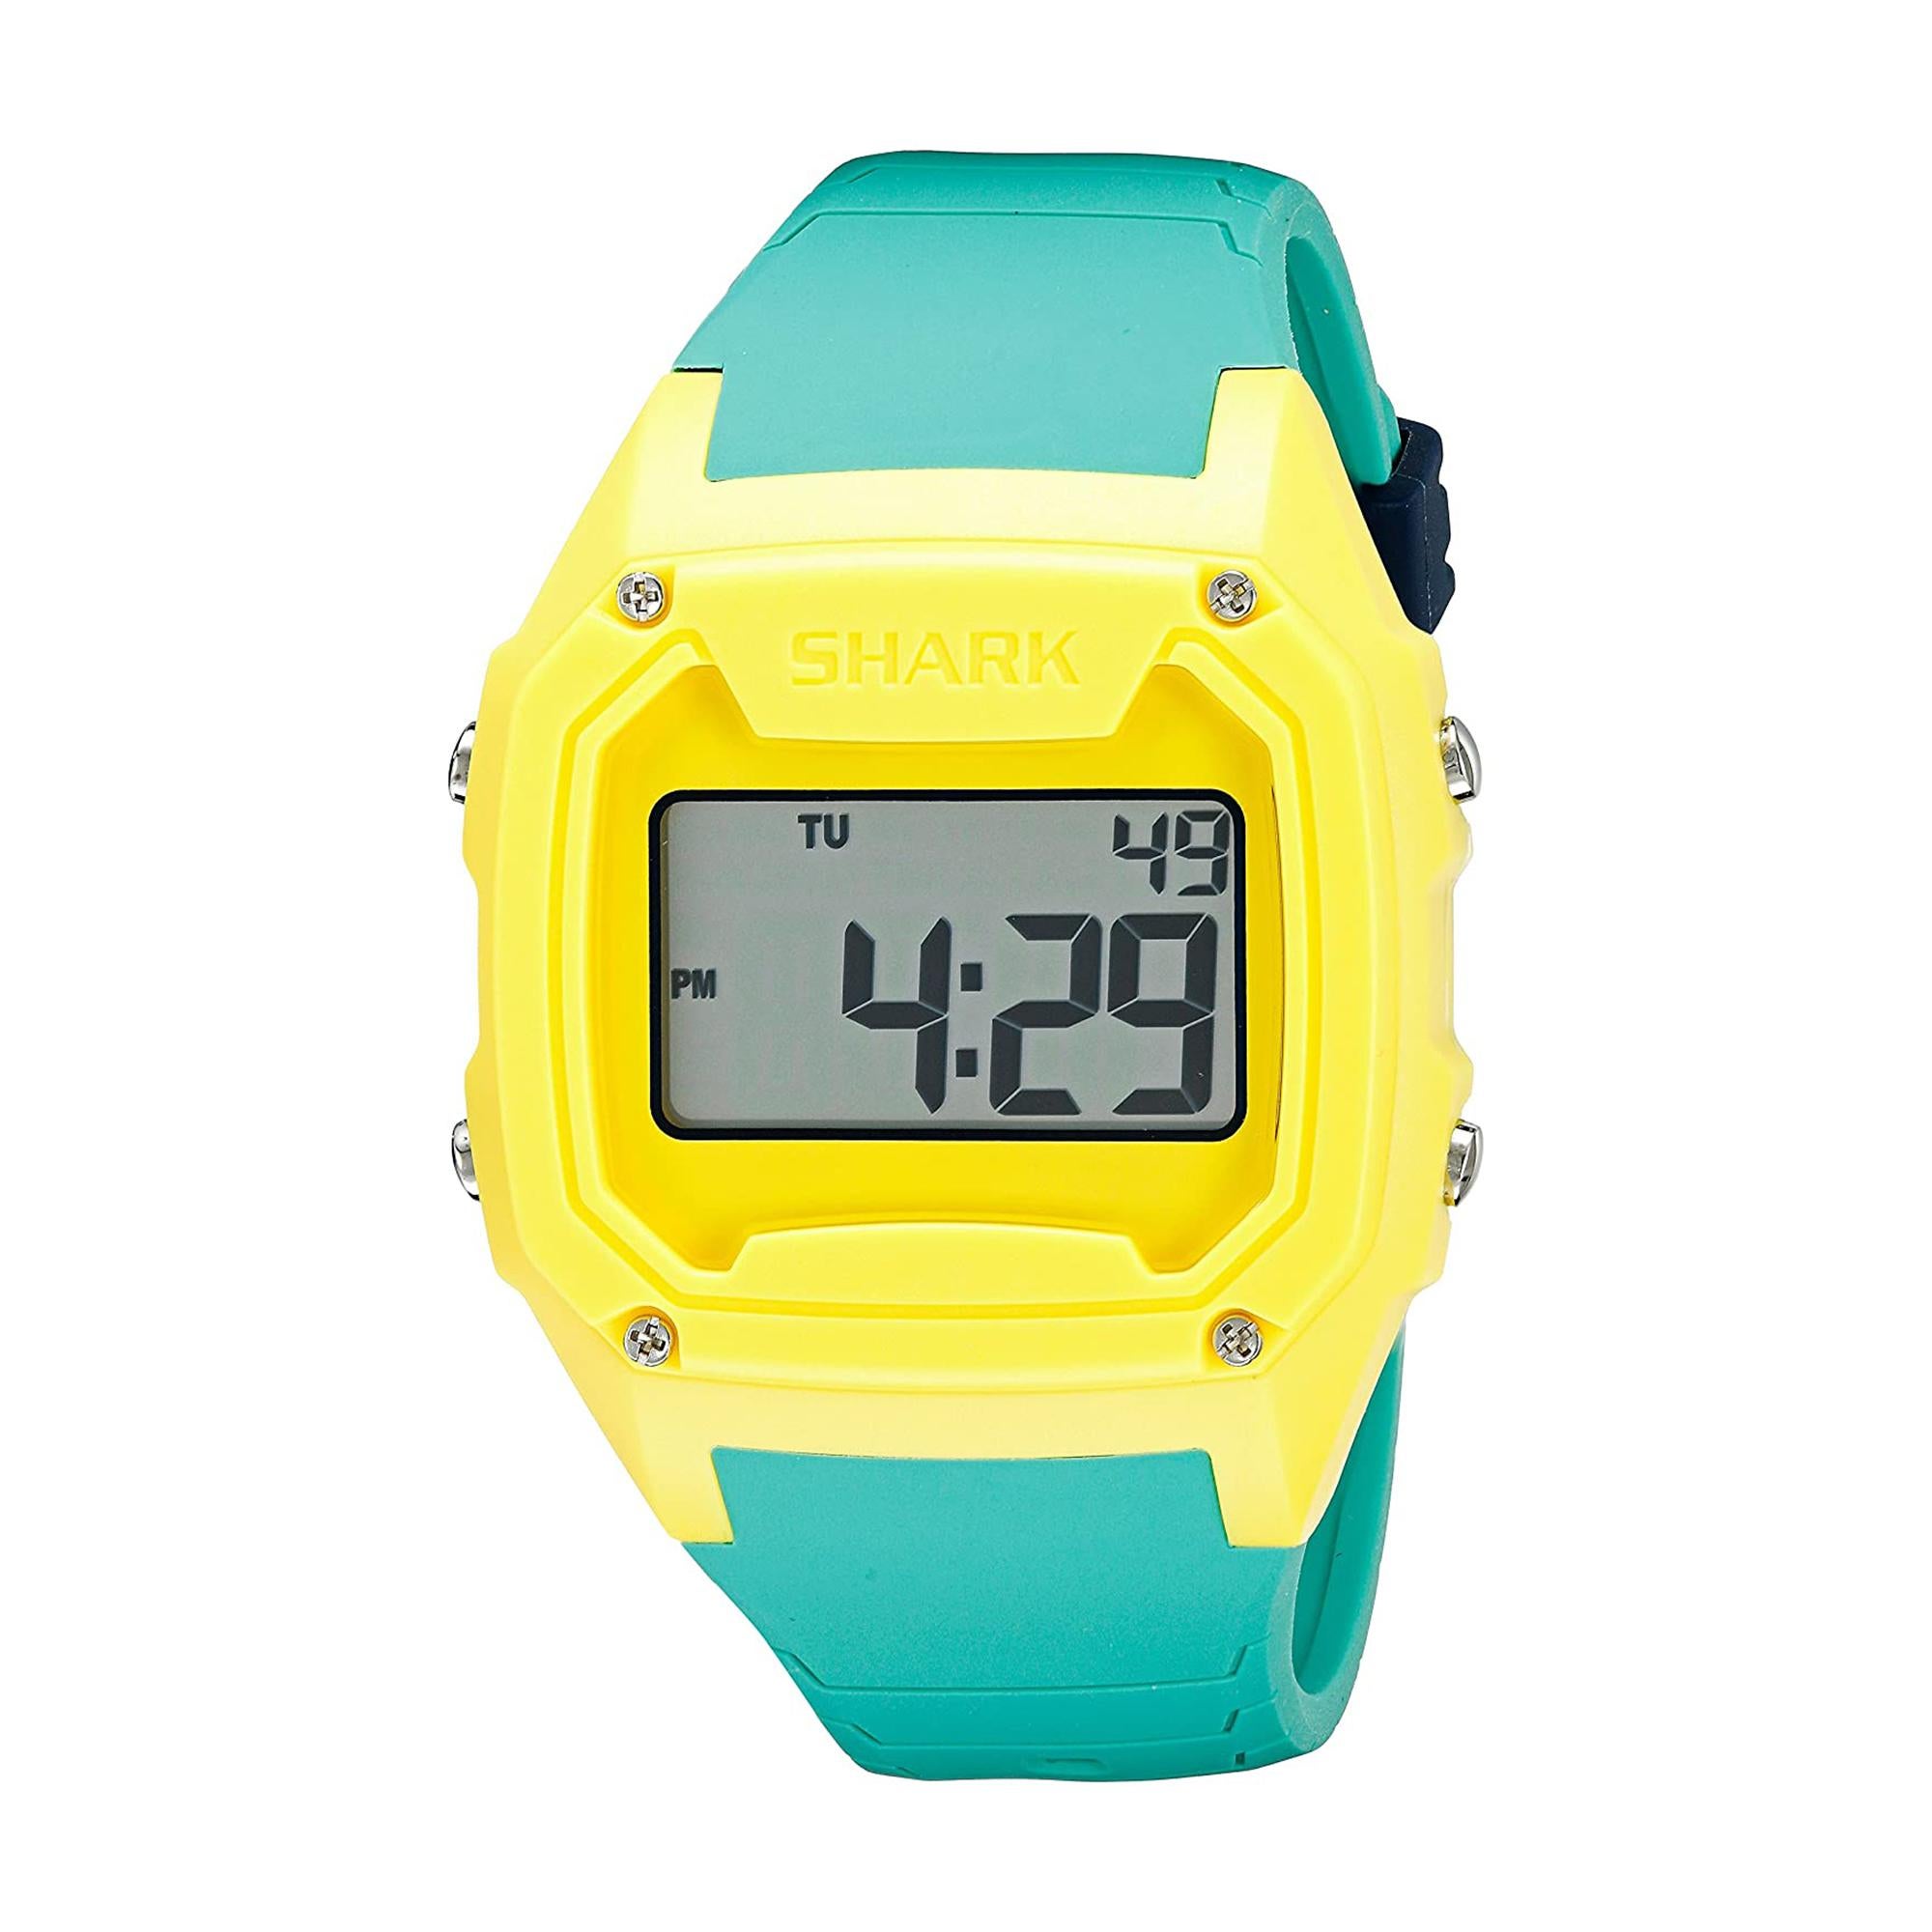 This is a mens Freestyle Shark Classic XL Watch Collection.The timepiece features yellow polycarbonate case and green durable silicone strap. Complications include alarm, dual time, countdown timer, stopwatch function, hydro pushers, night vision.